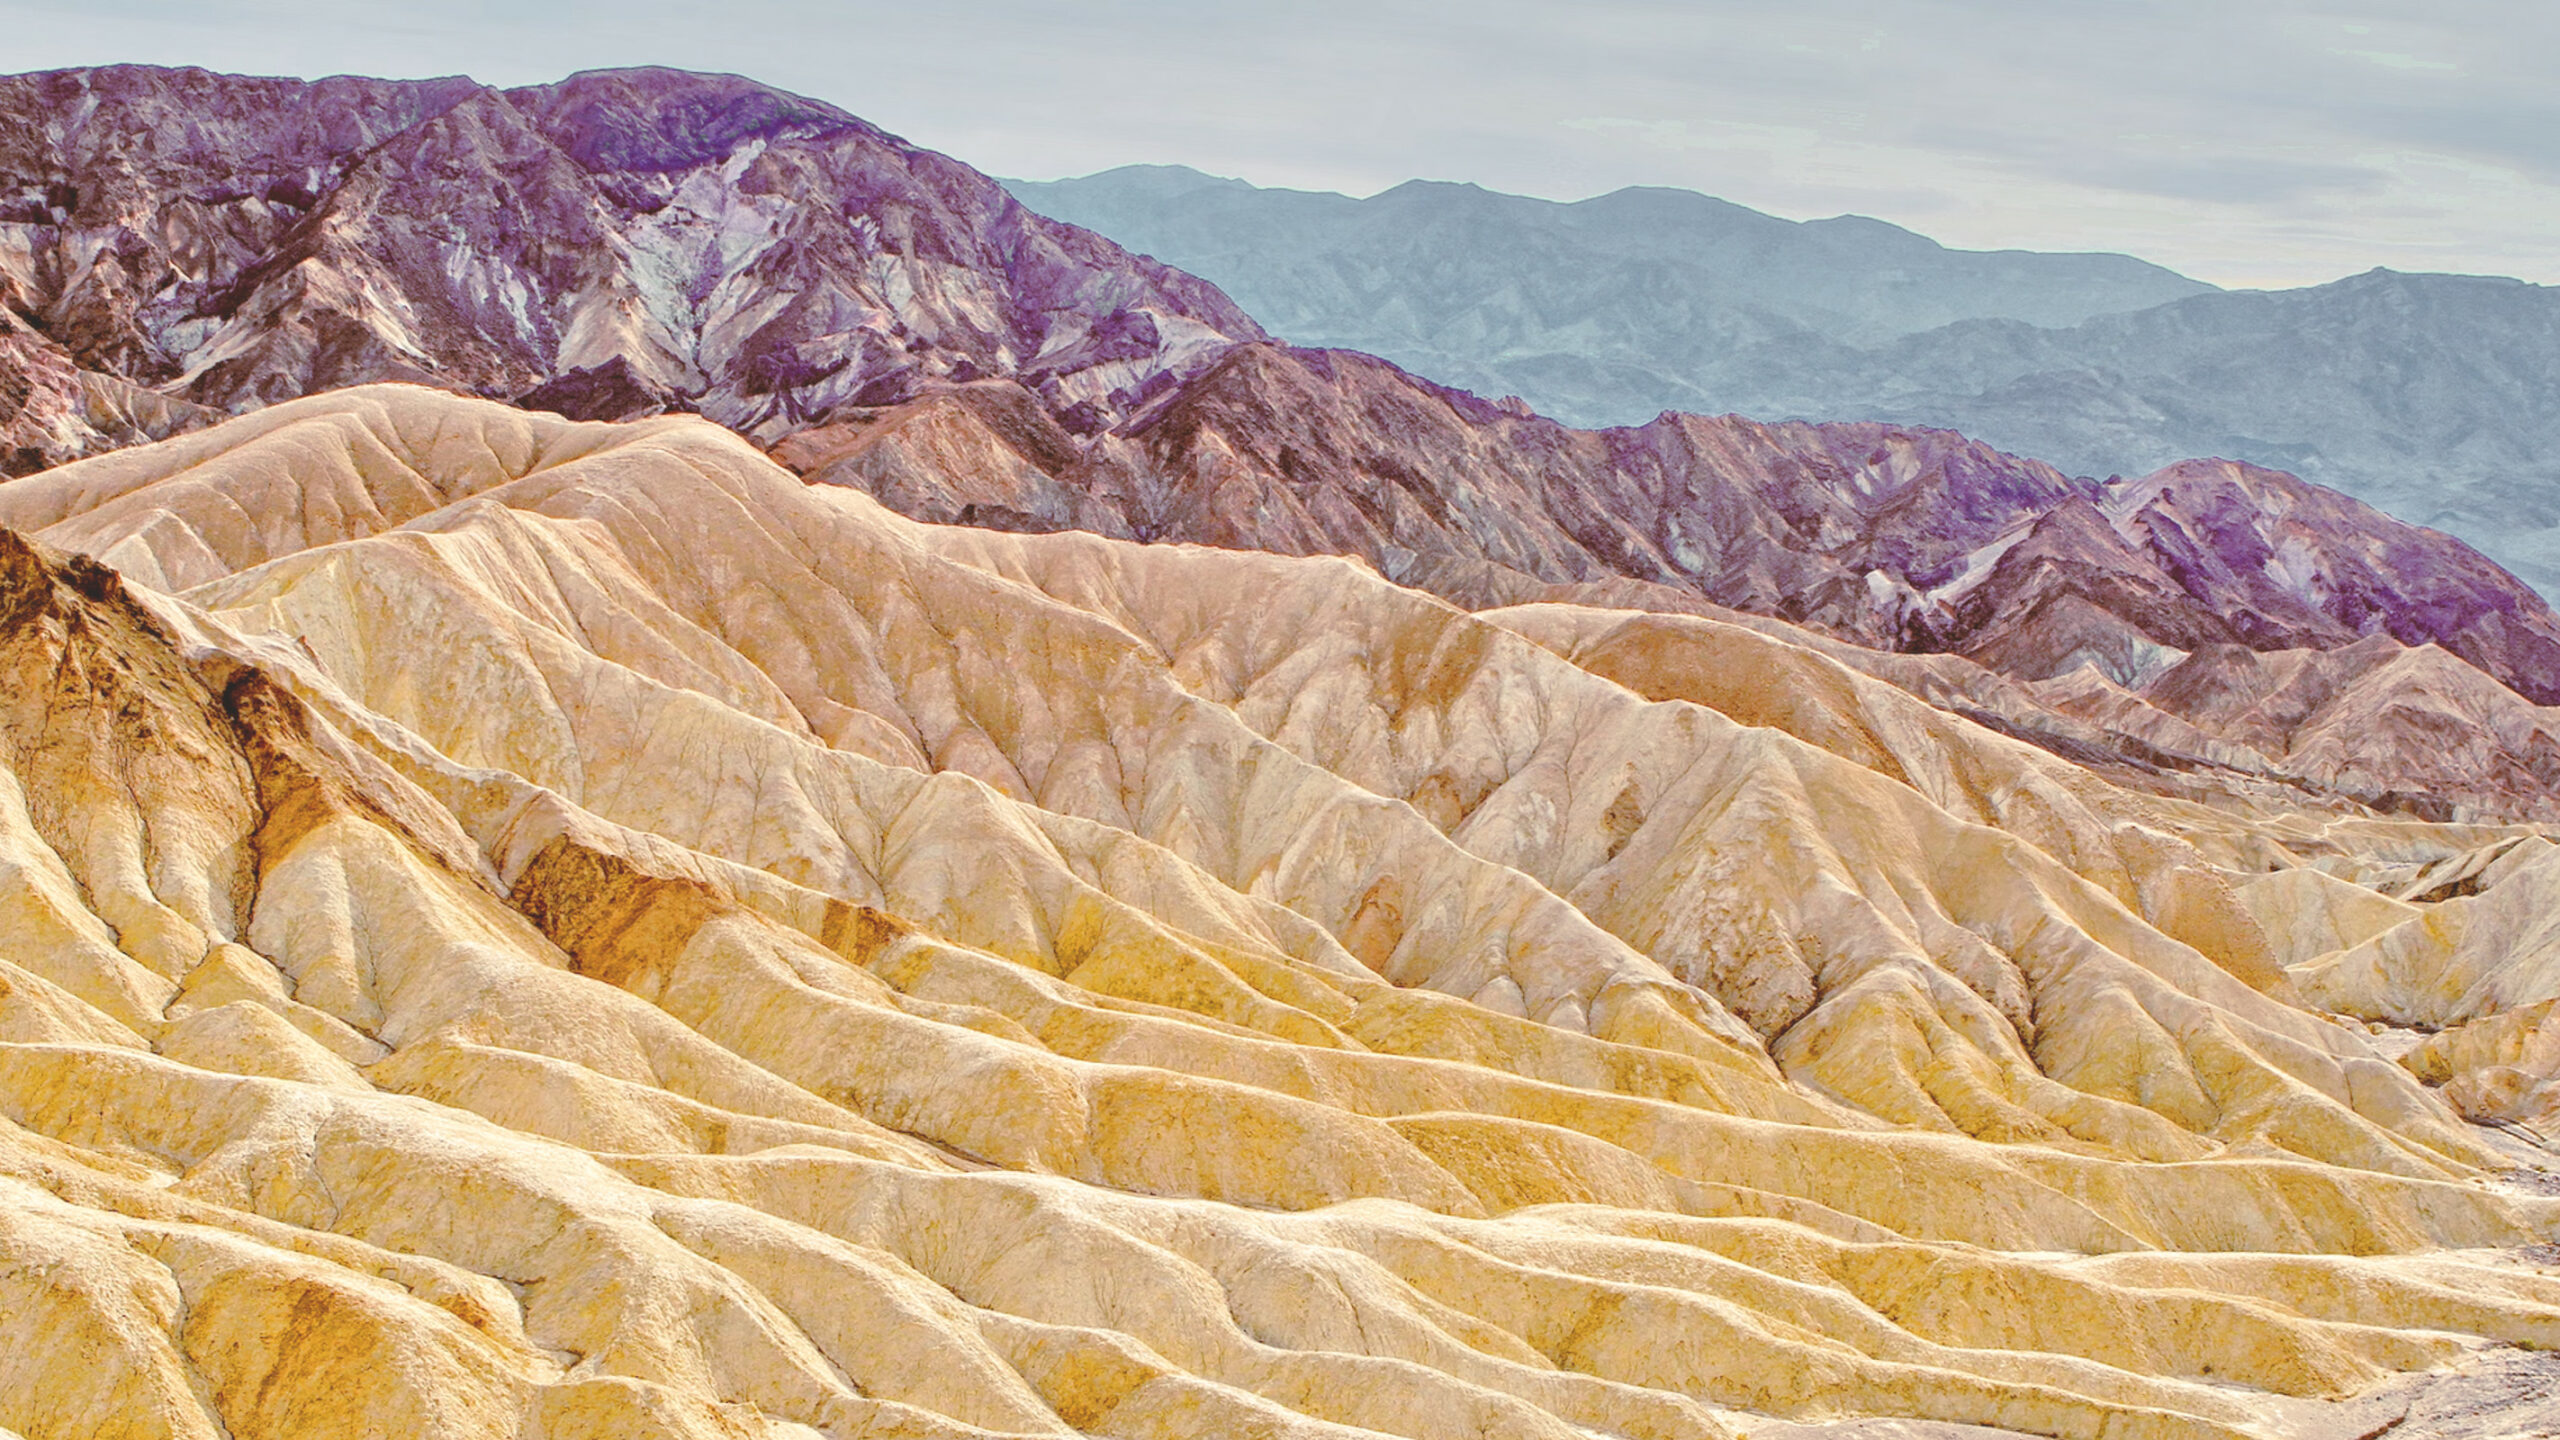 Death Valley, the driest and hottest place in the US